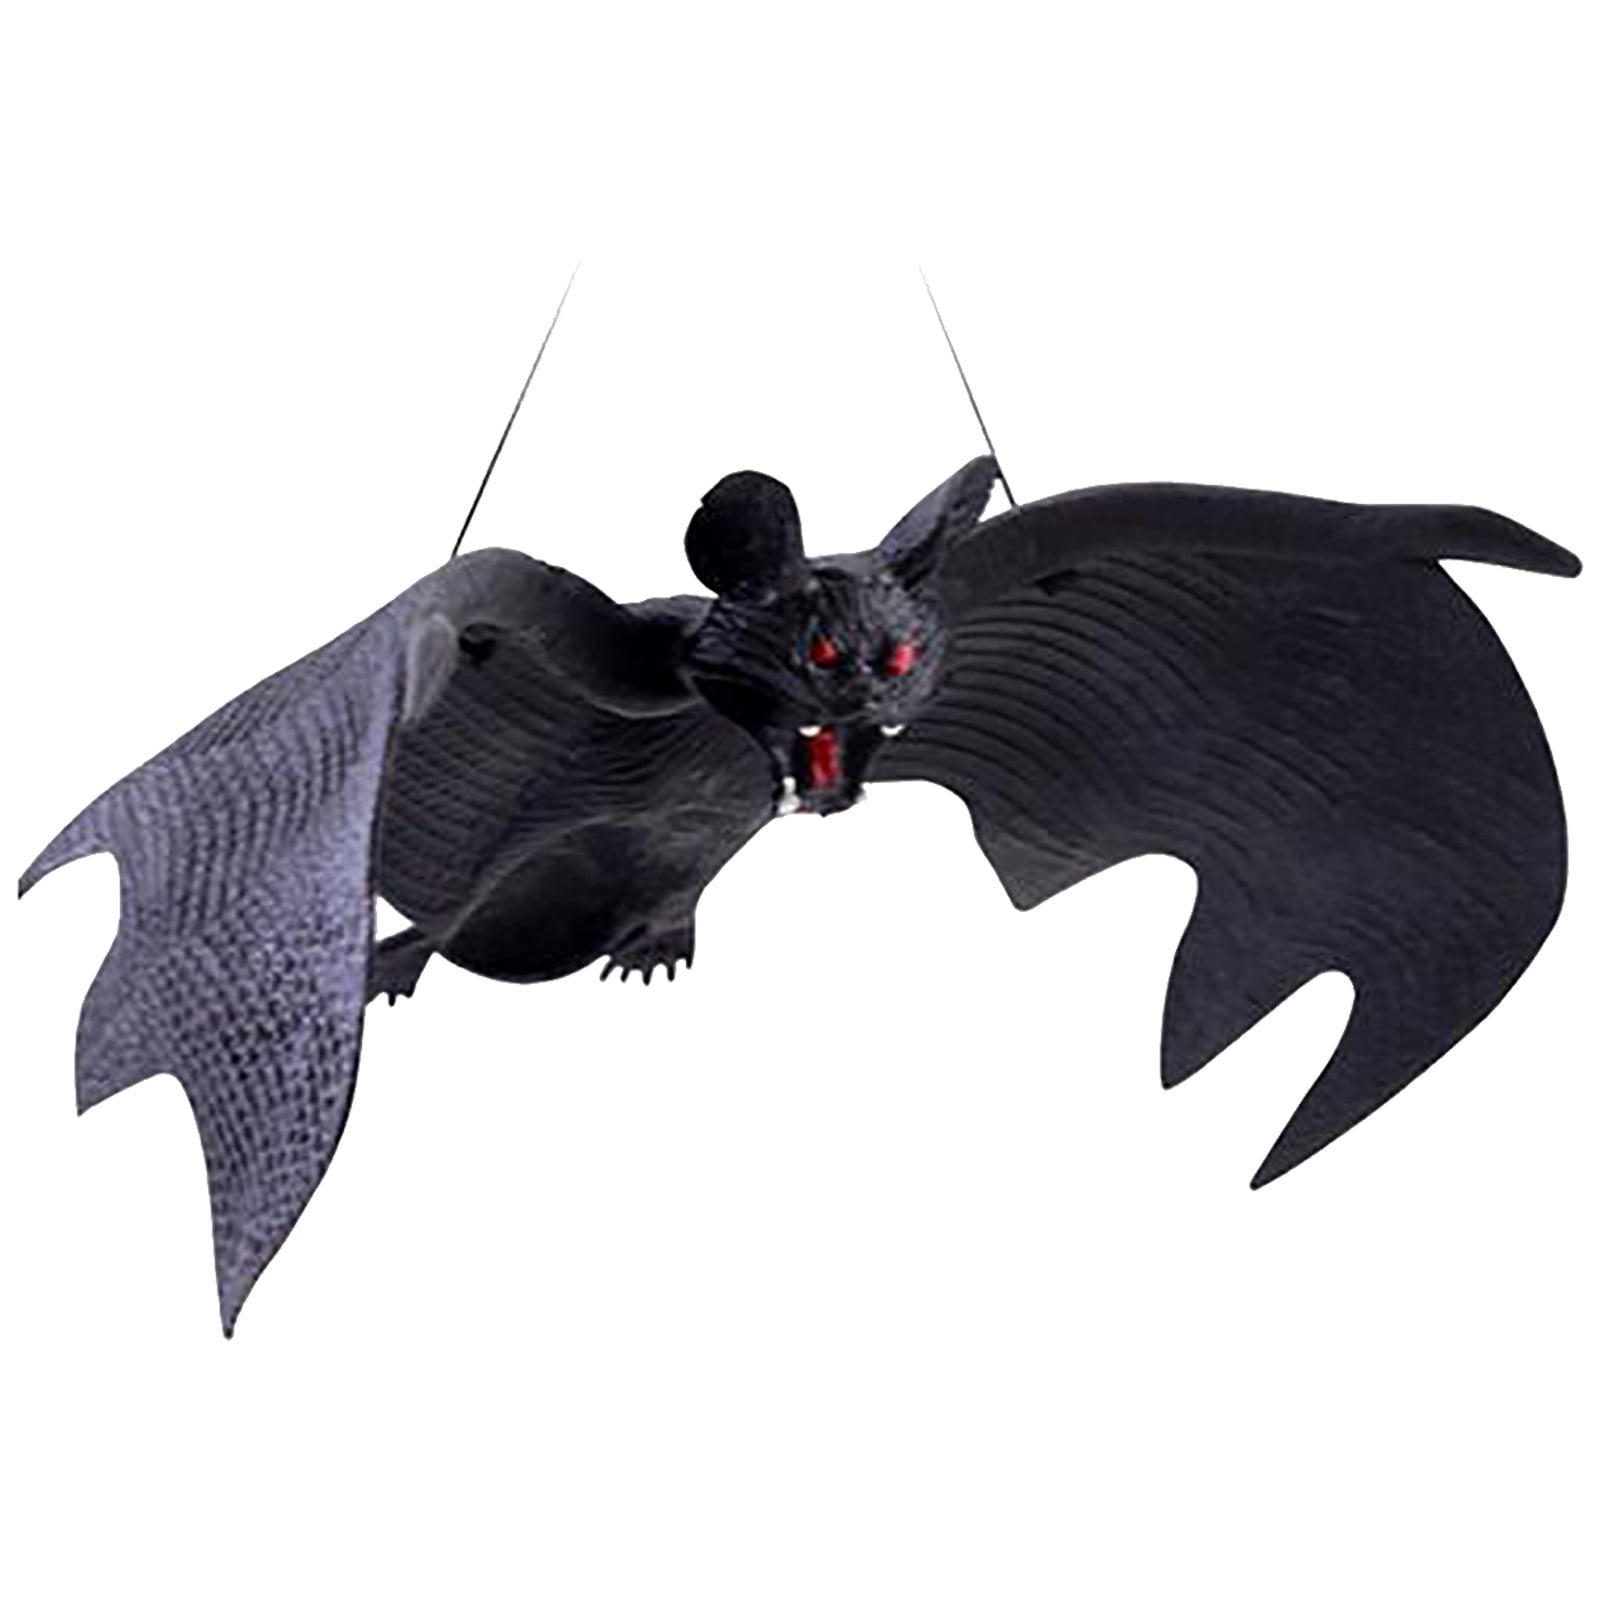 Scary Halloween Party Decoration Rubber For Bats Hanging adornment Home NEW